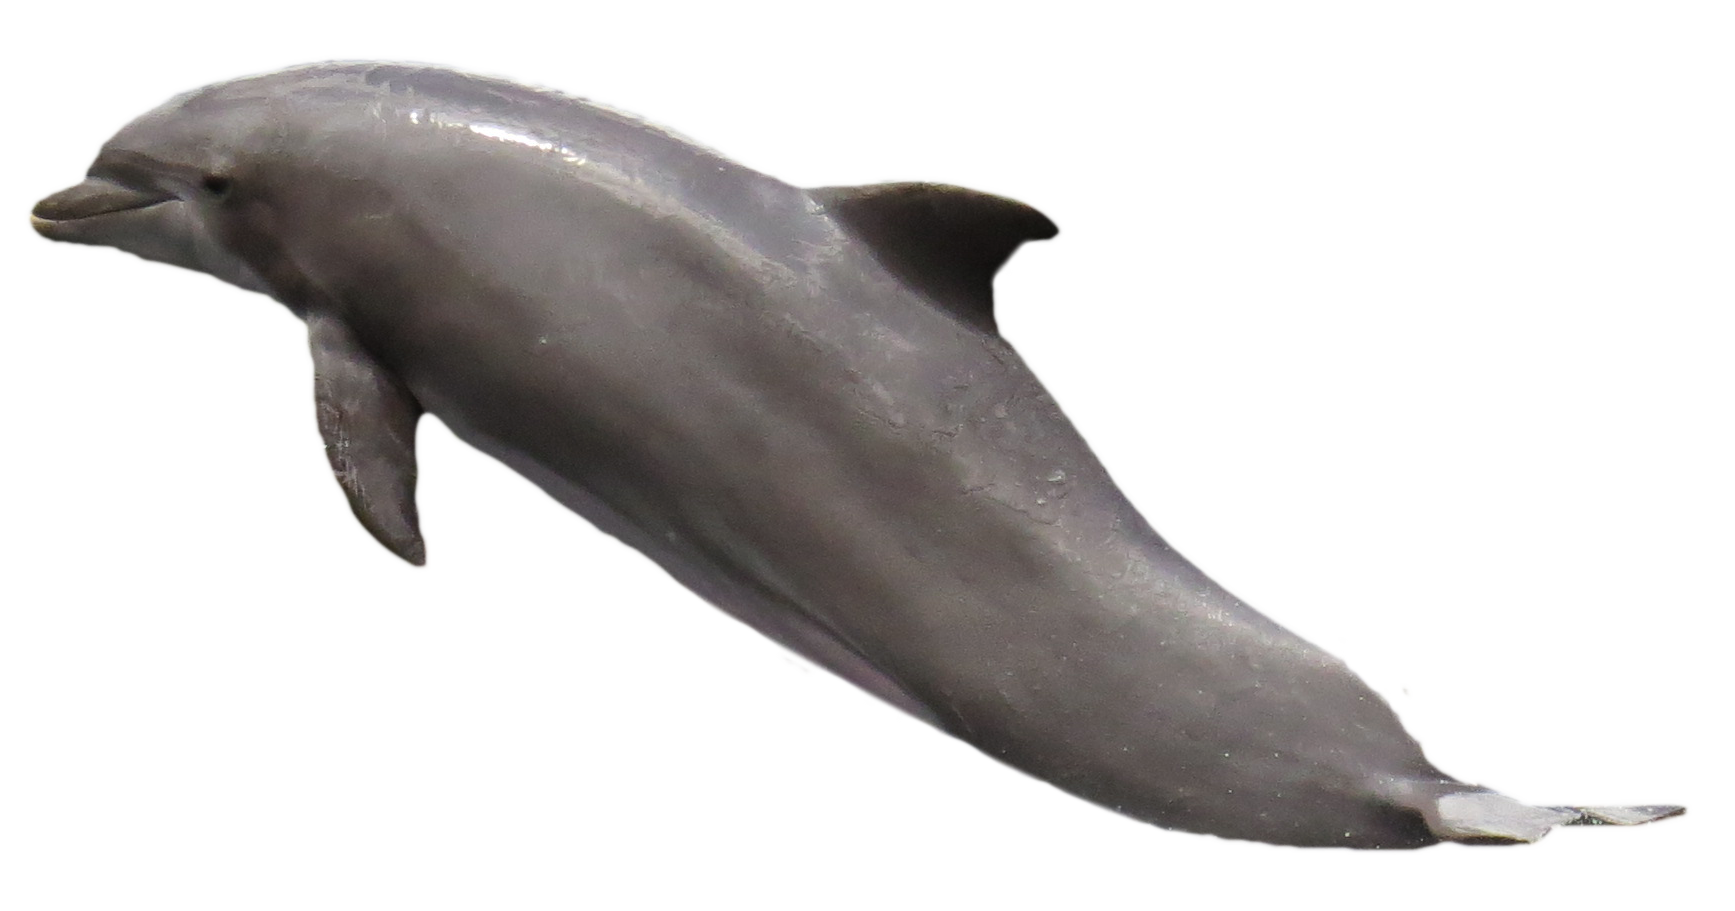 Dolphin PNG